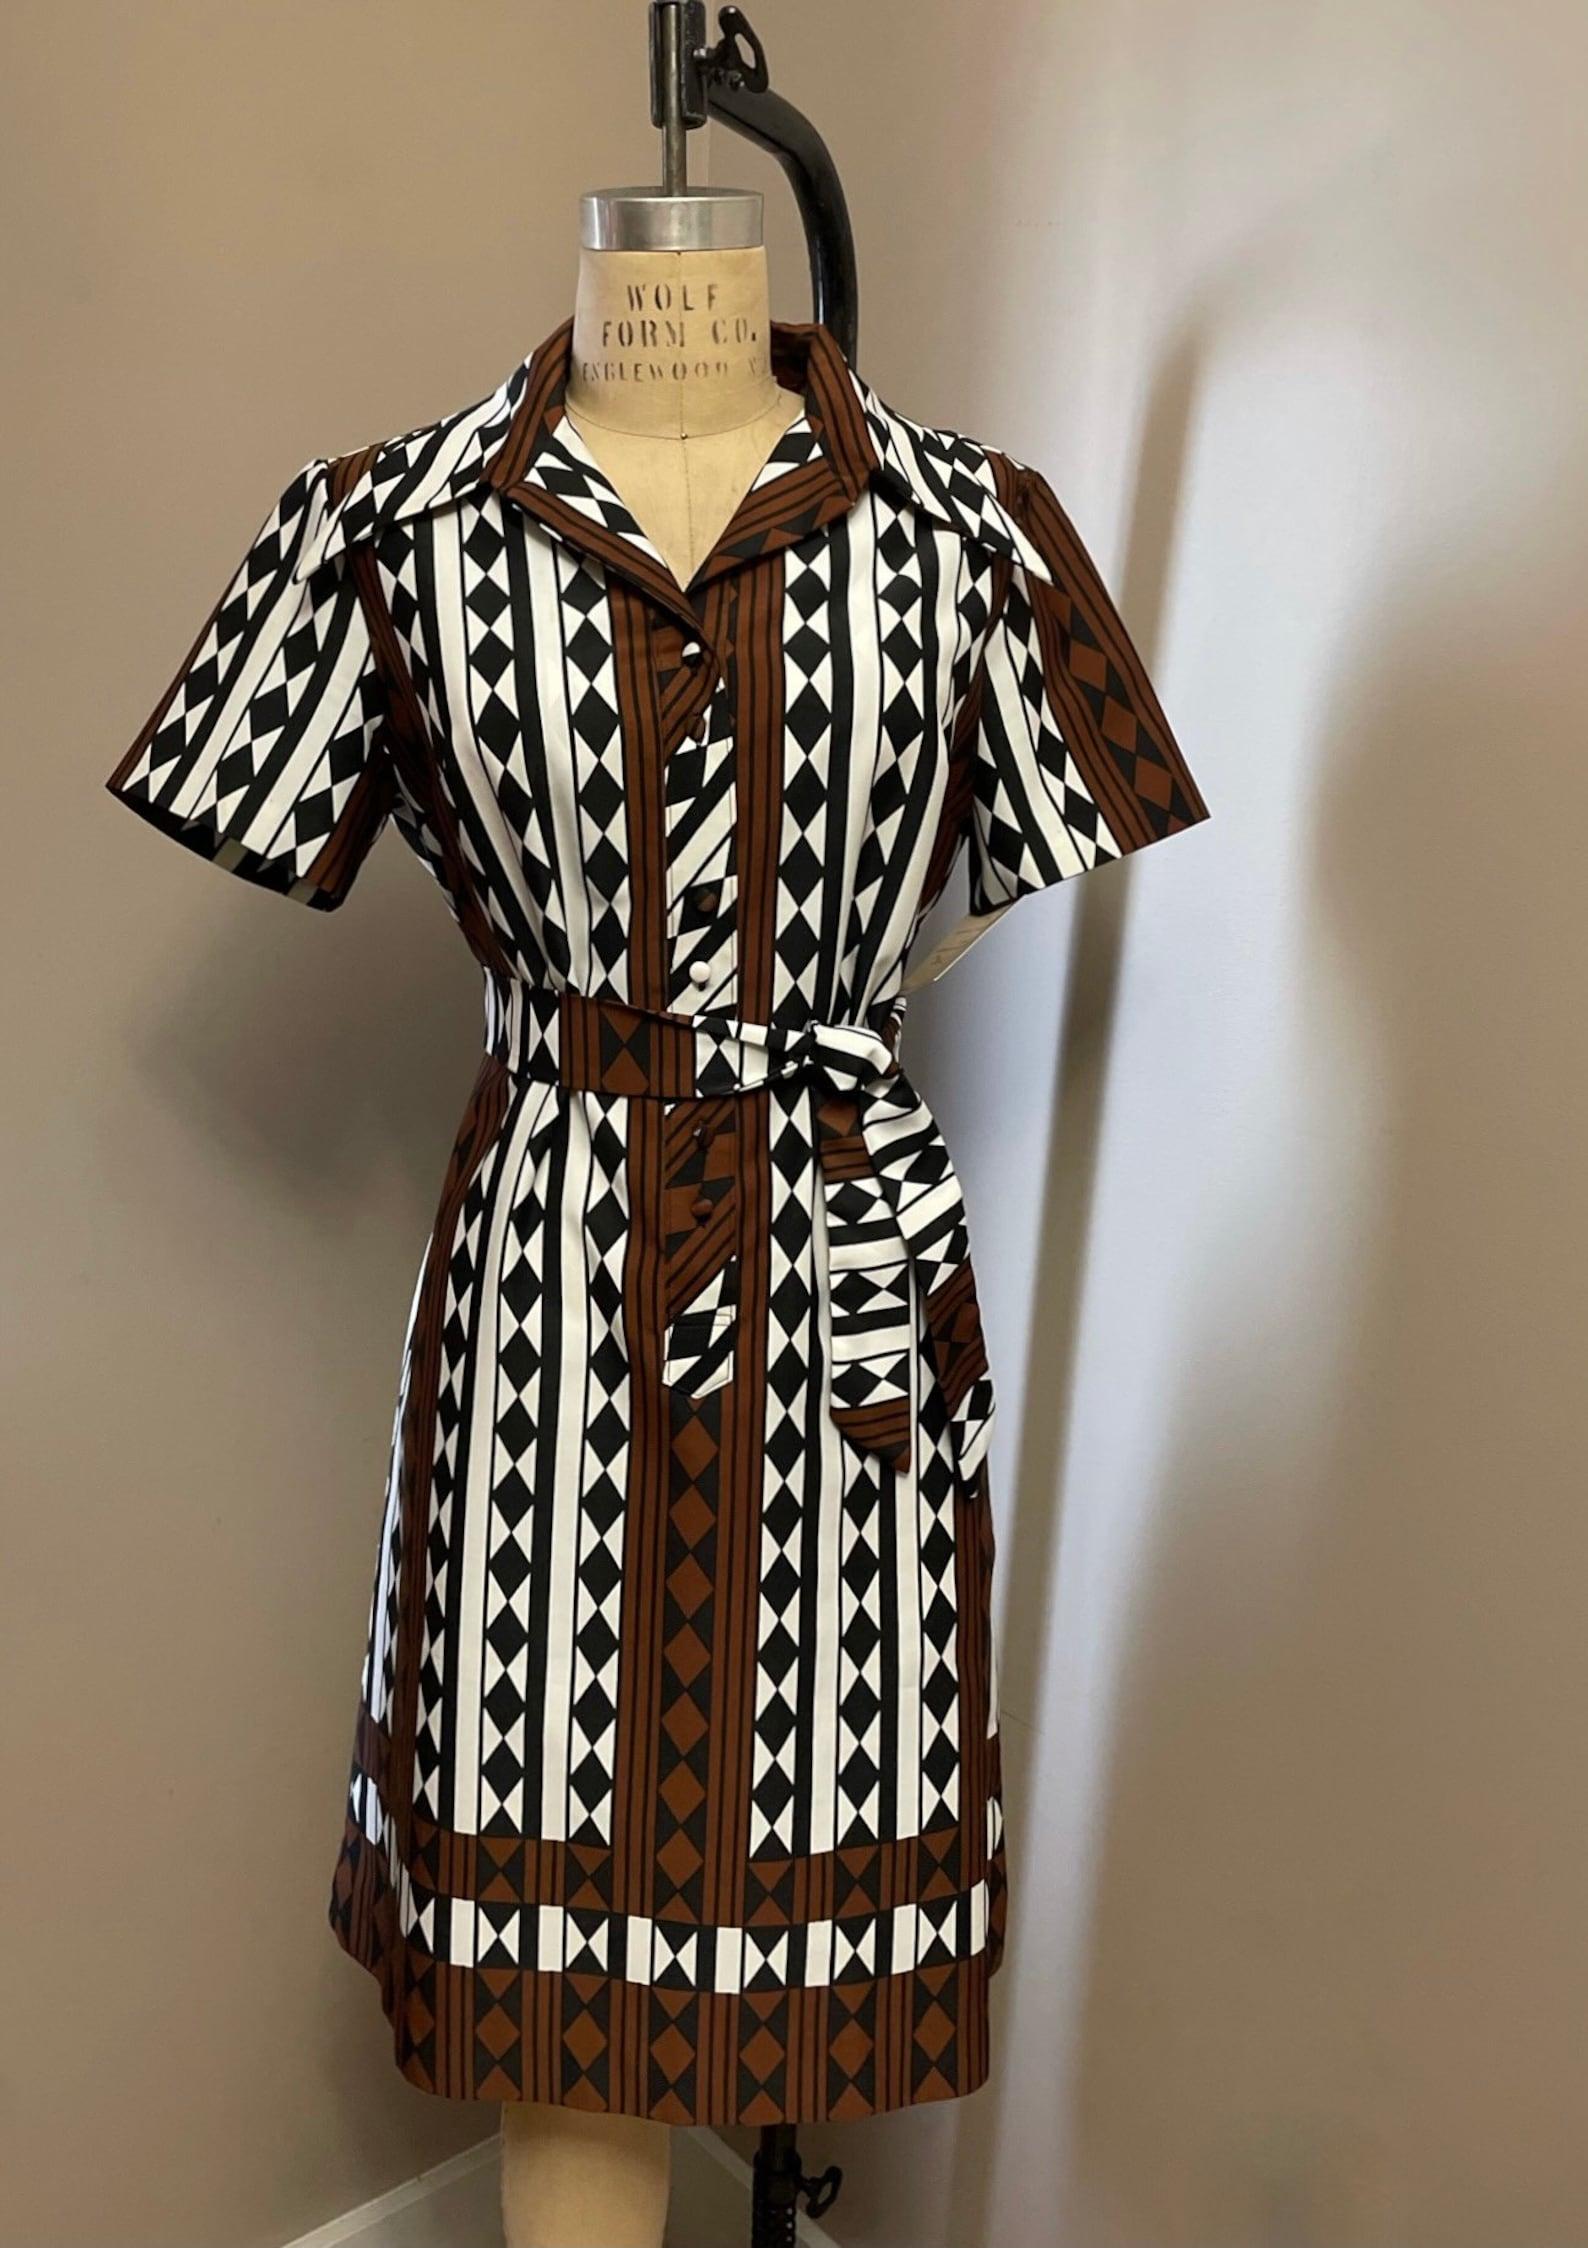 Vintage Lanvin mod dress
tricolor geometric print
shirt dress styling
exaggerated winged collar
short sleeves
self covered buttons
matching sash belt
falls to knee length

🏷 Has an extra button hidden under the collar which is original to the